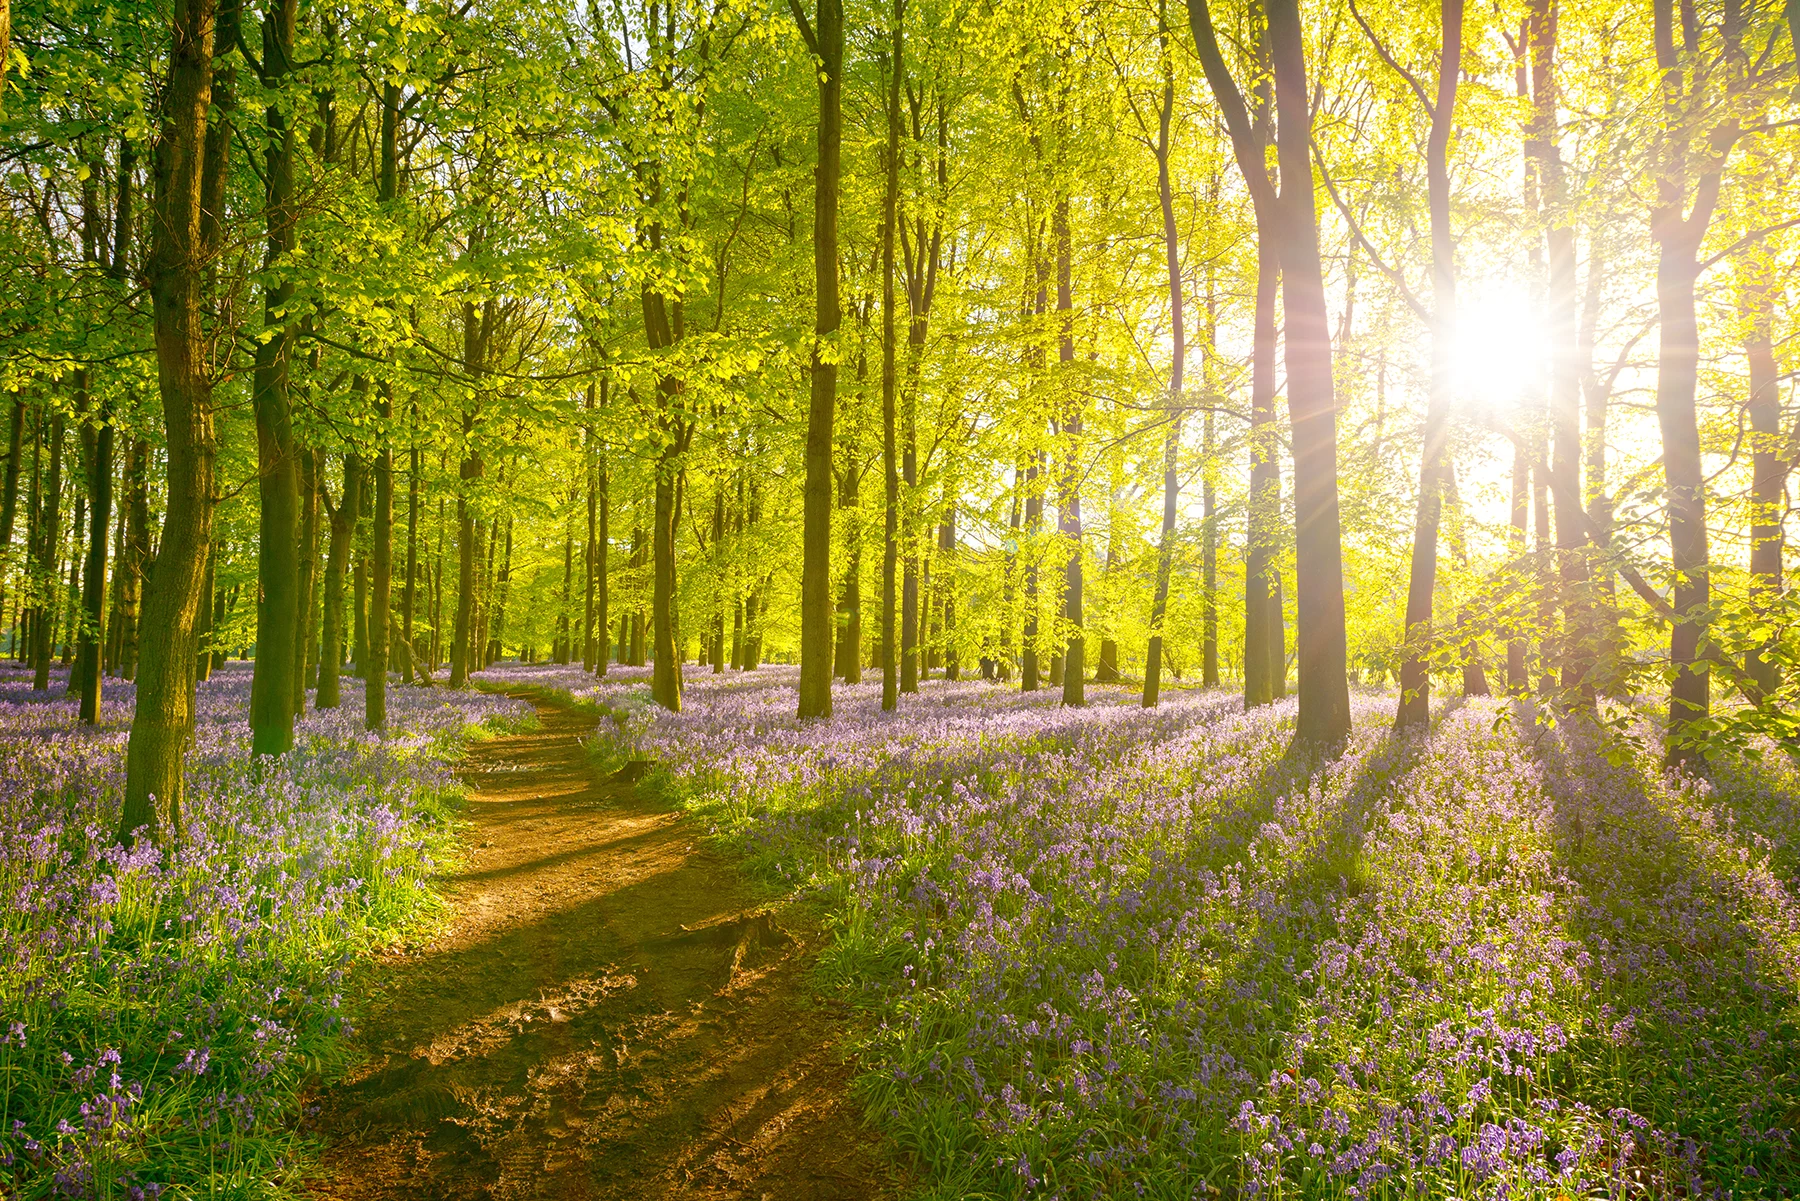 Sunlight shining through the trees in a quiet forest in springtime, with a carpet of flowers and a dirt path below.